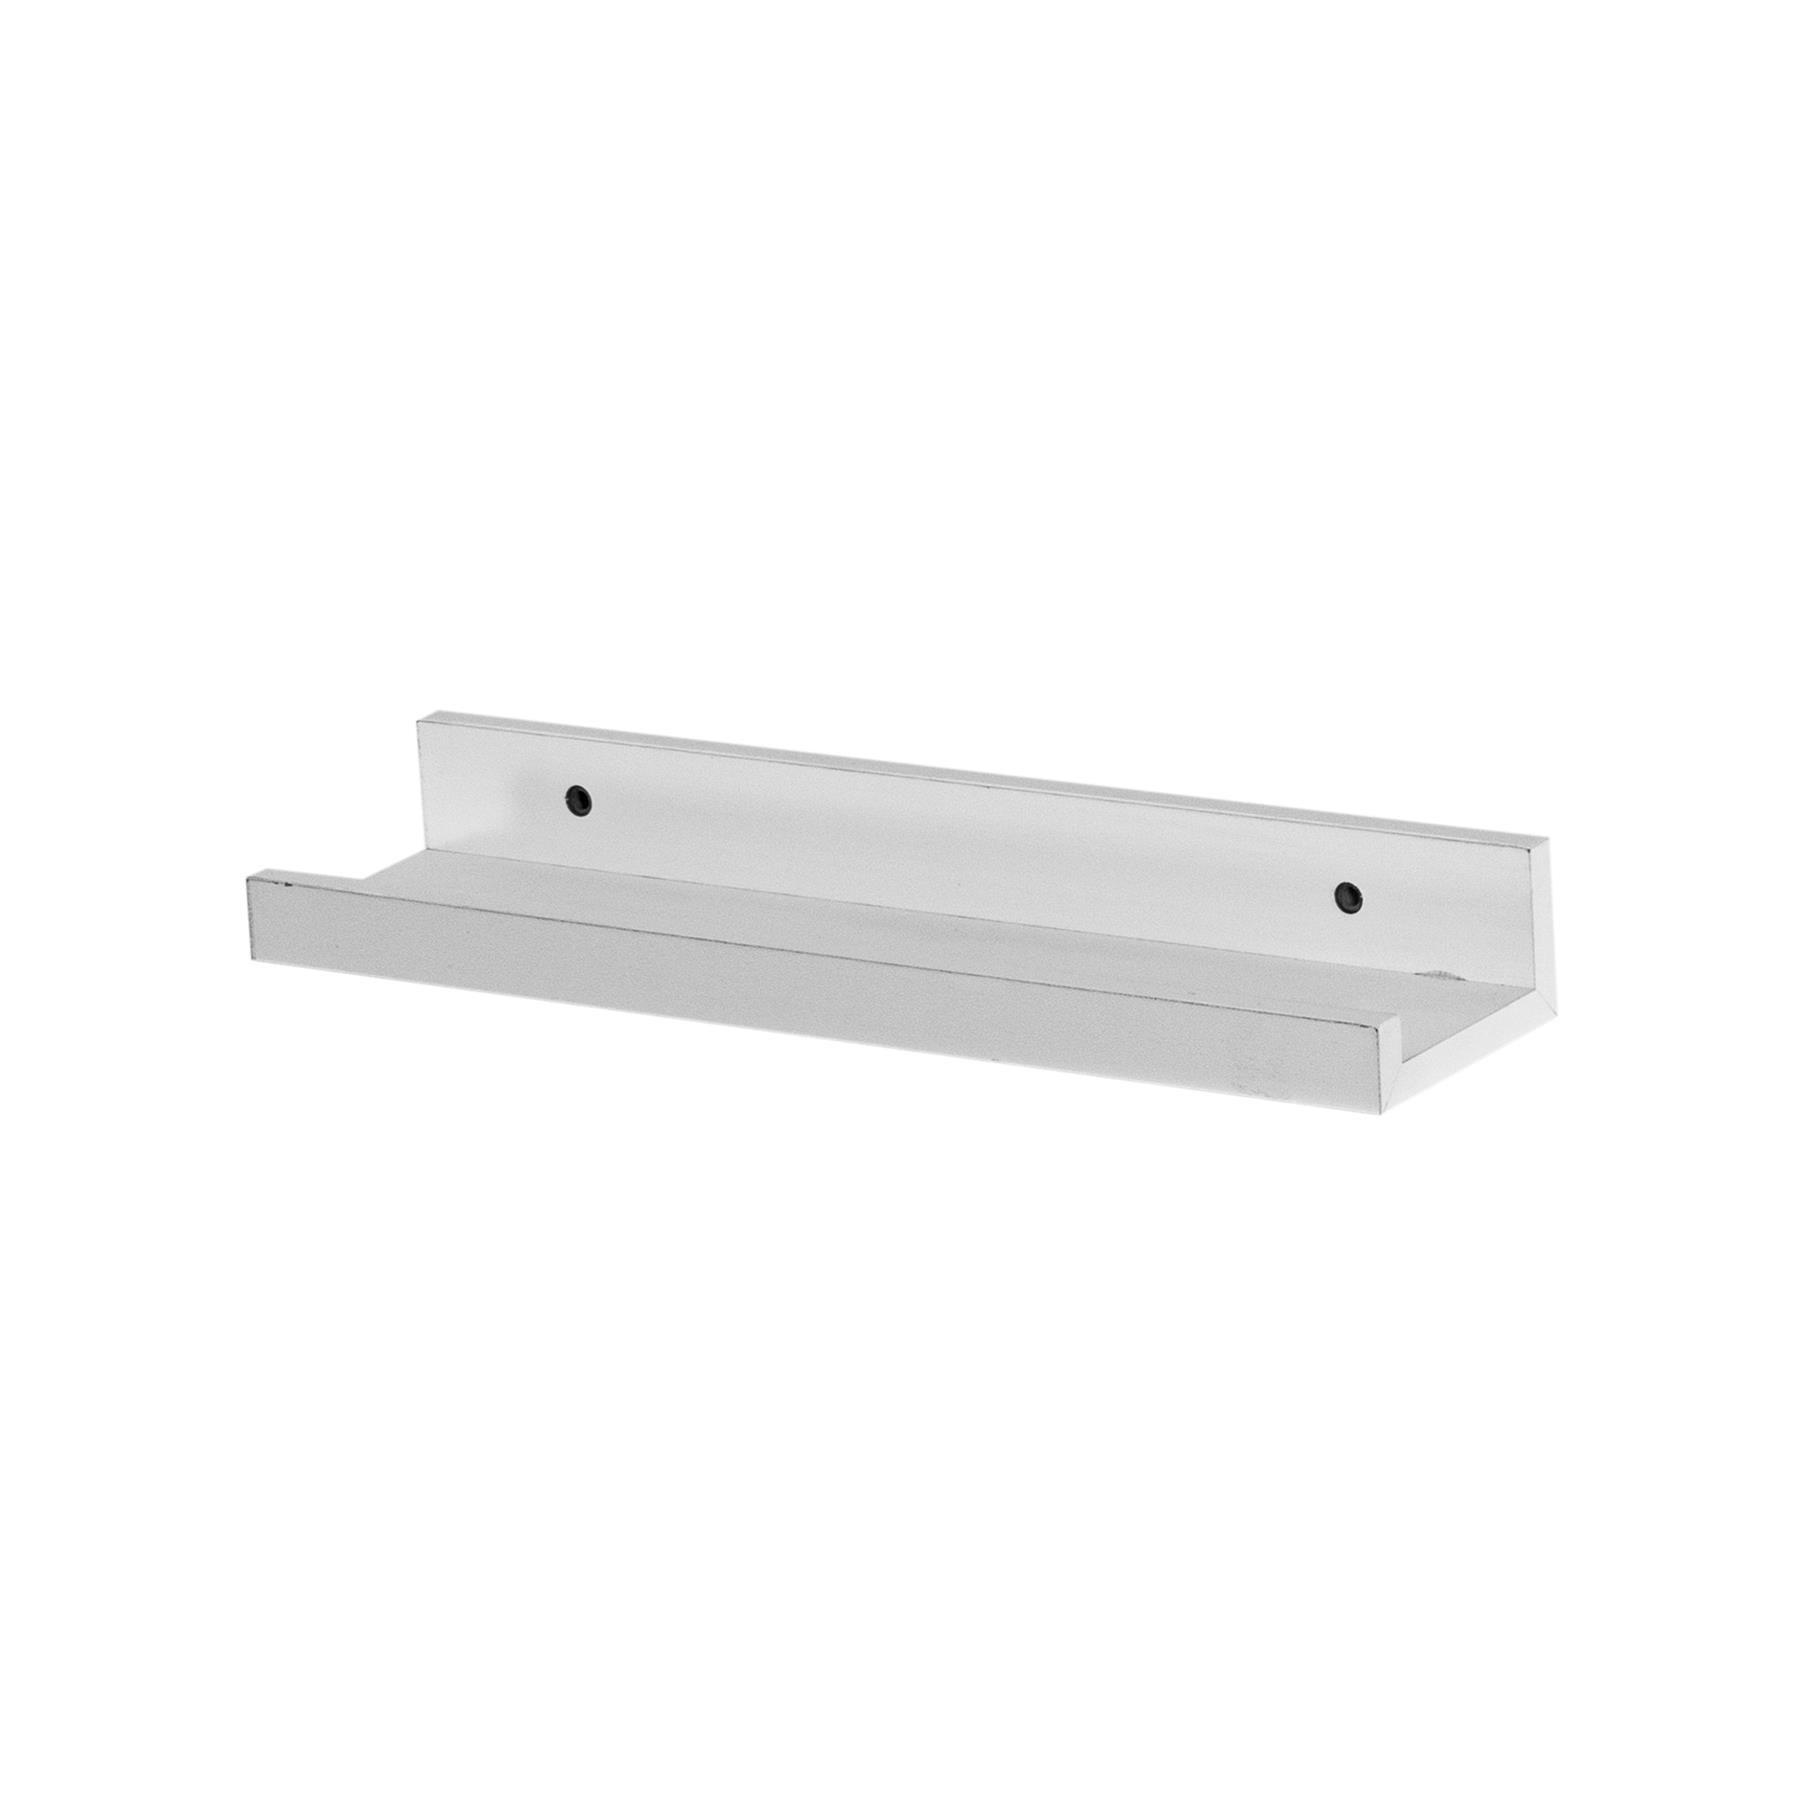 32.5cm Floating Picture Ledge Wall Shelf | By Harbour Housewares